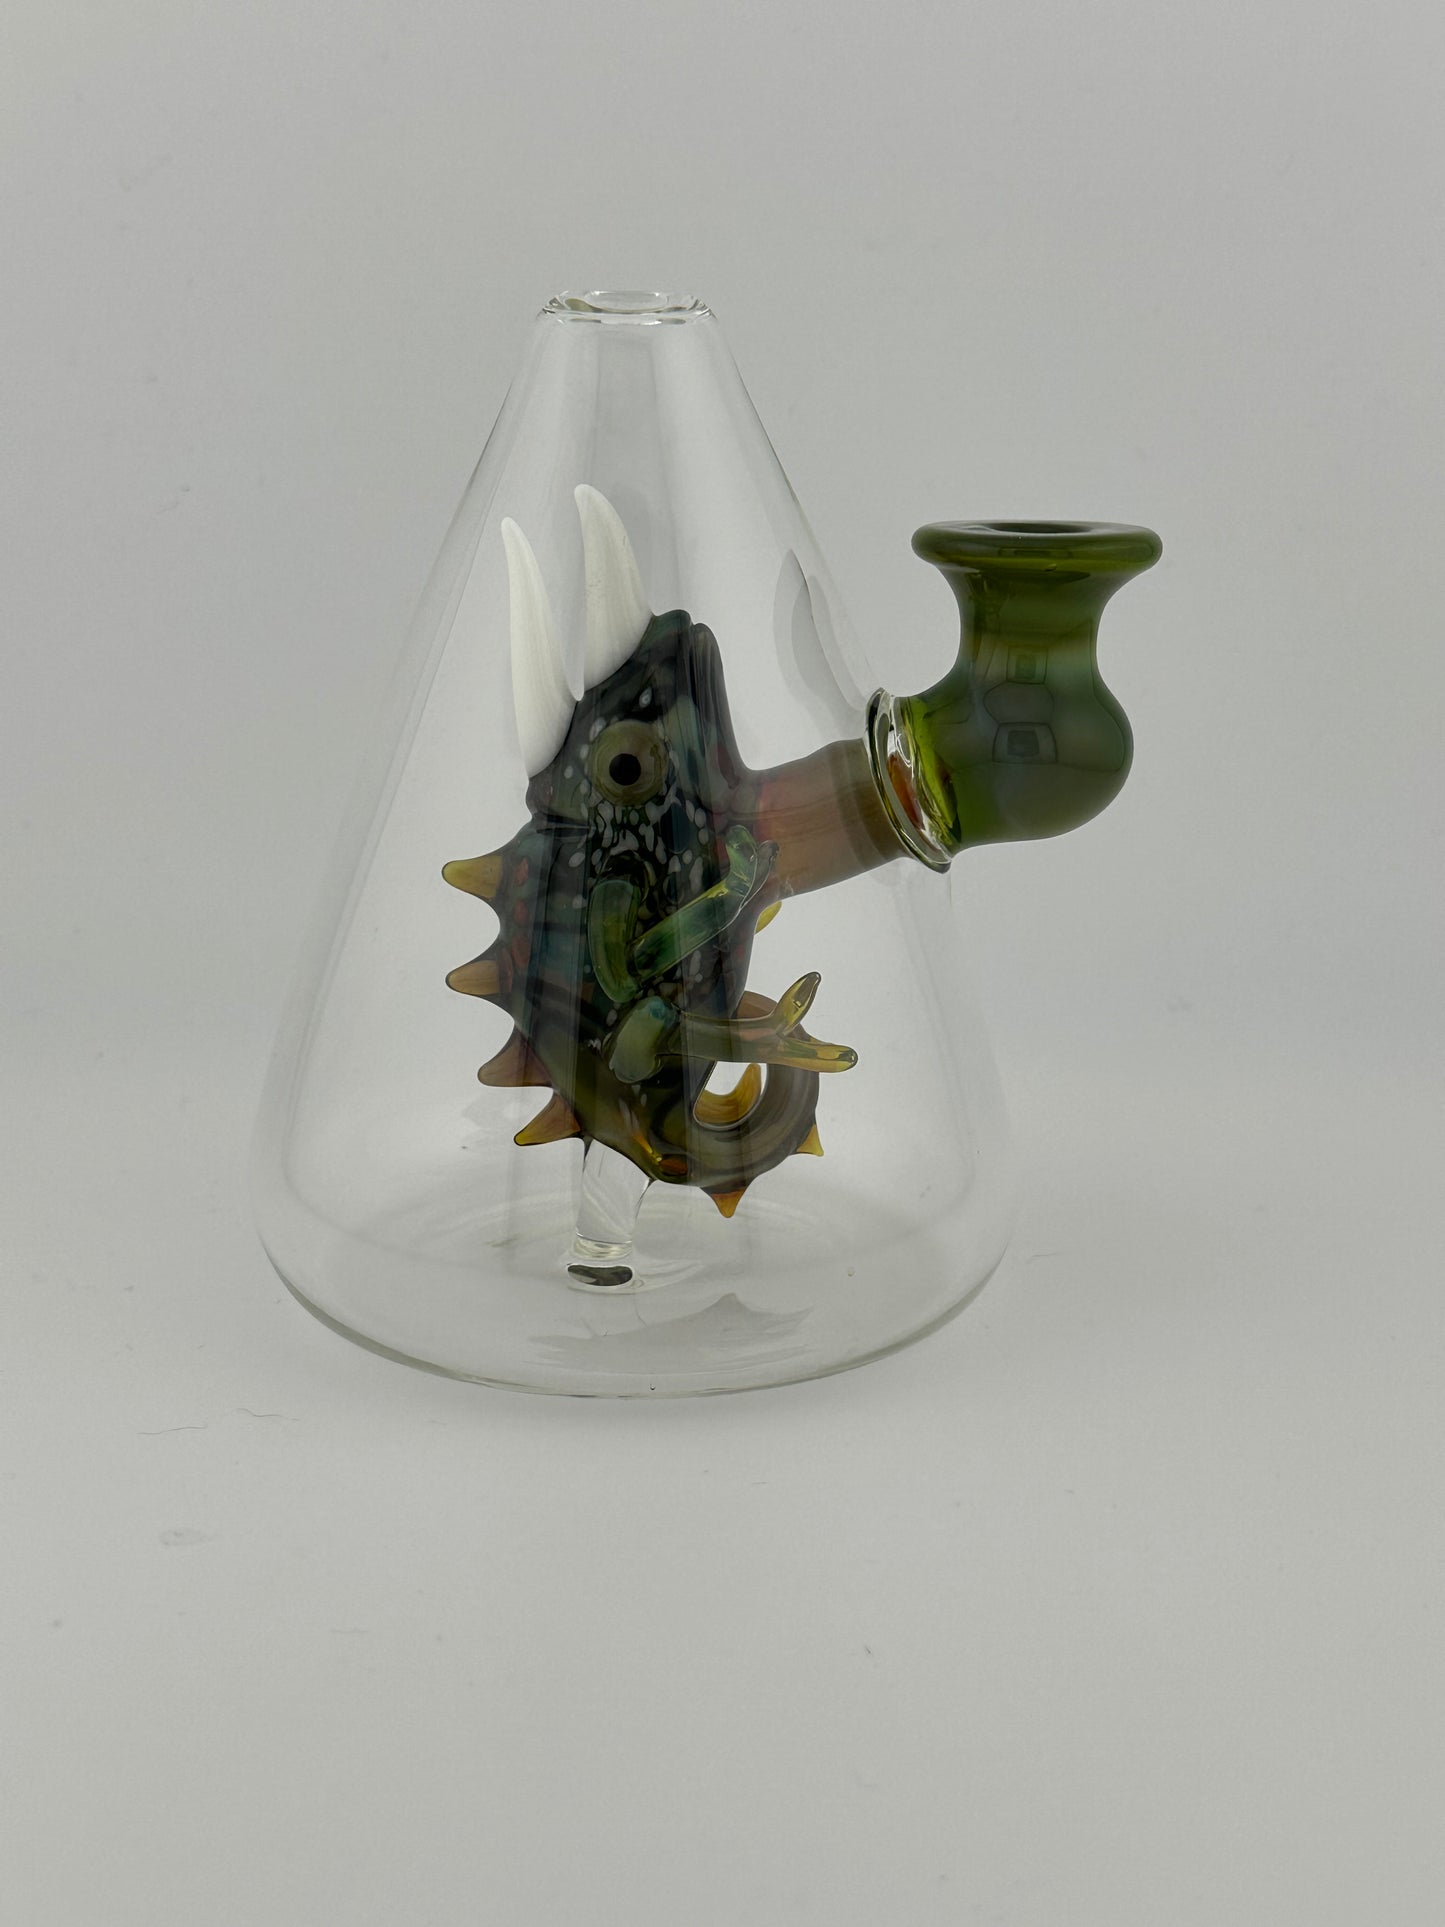 Clear Cone Glass Rig 10mm with green chameleon inside. American Mdae glass art. Borosilicate